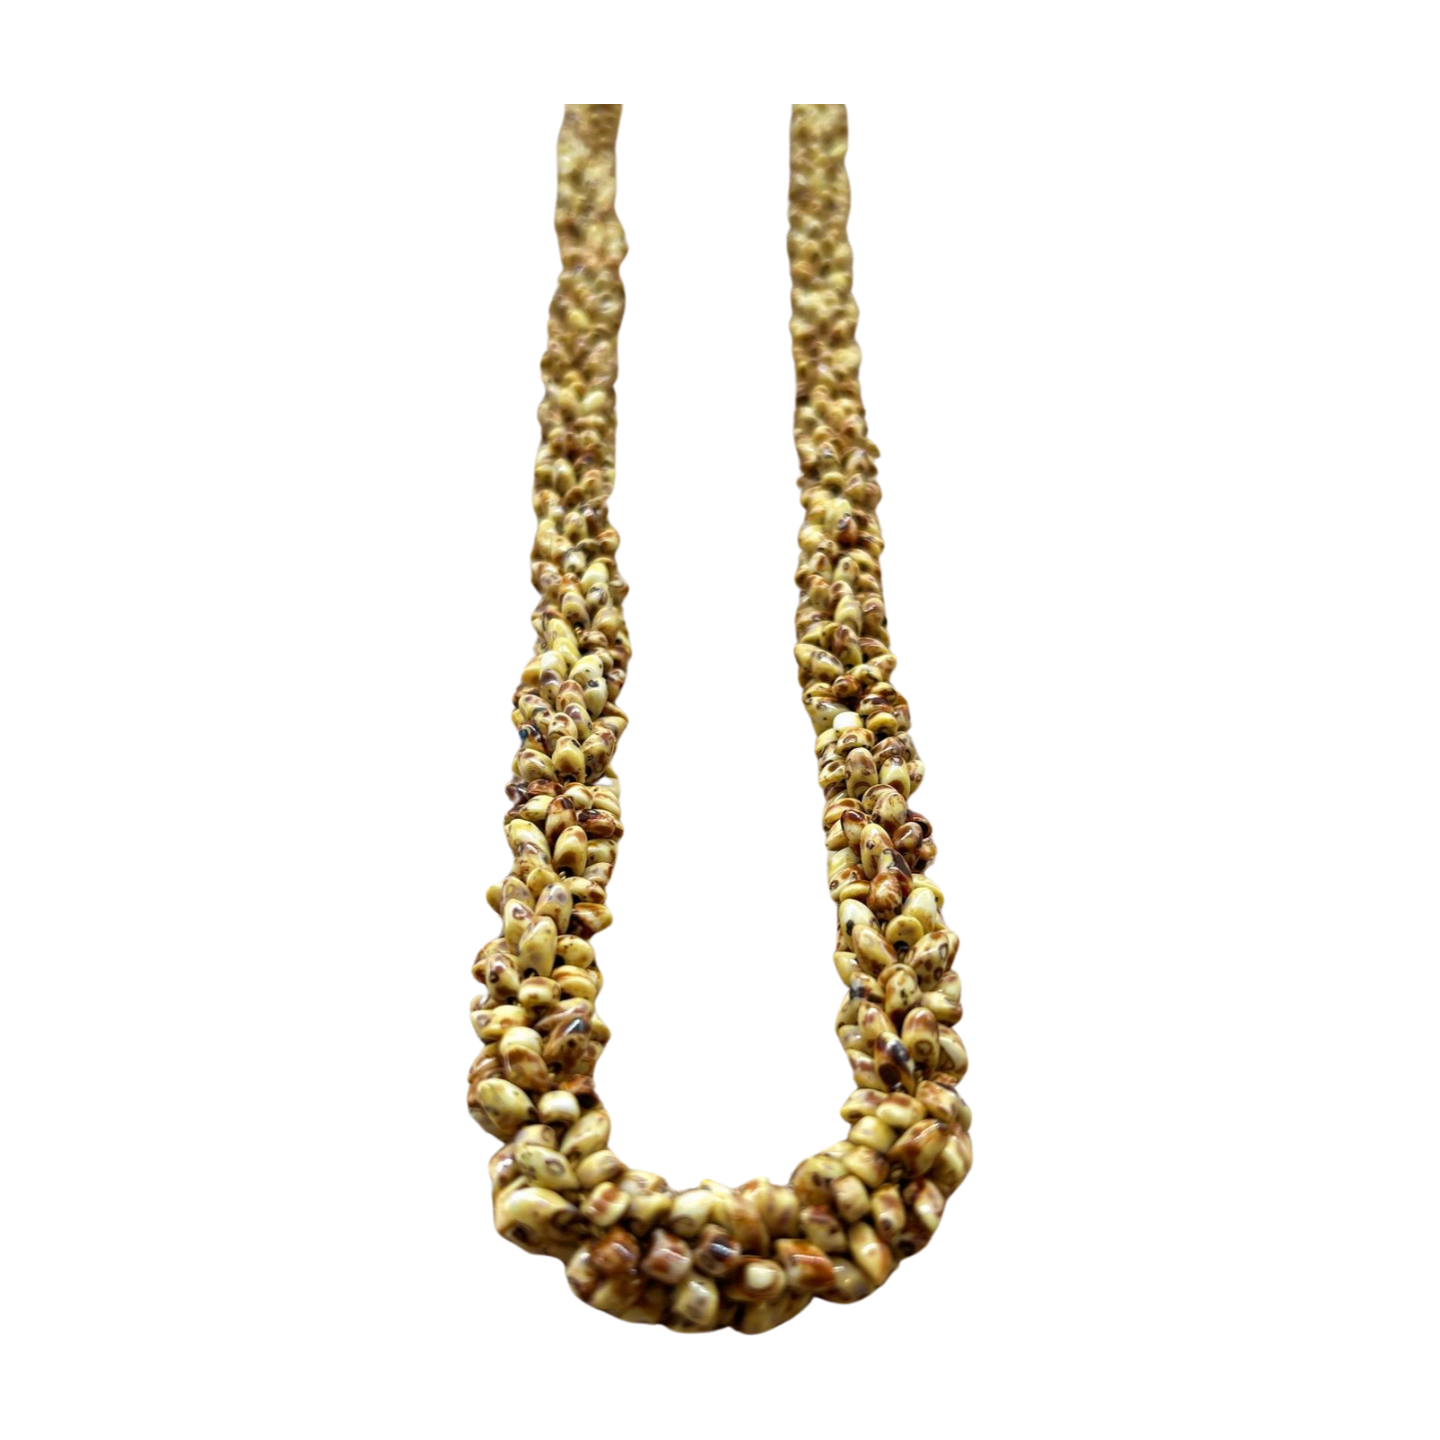 Picasso Yellow Dragon Scales Necklace  - 33-34"